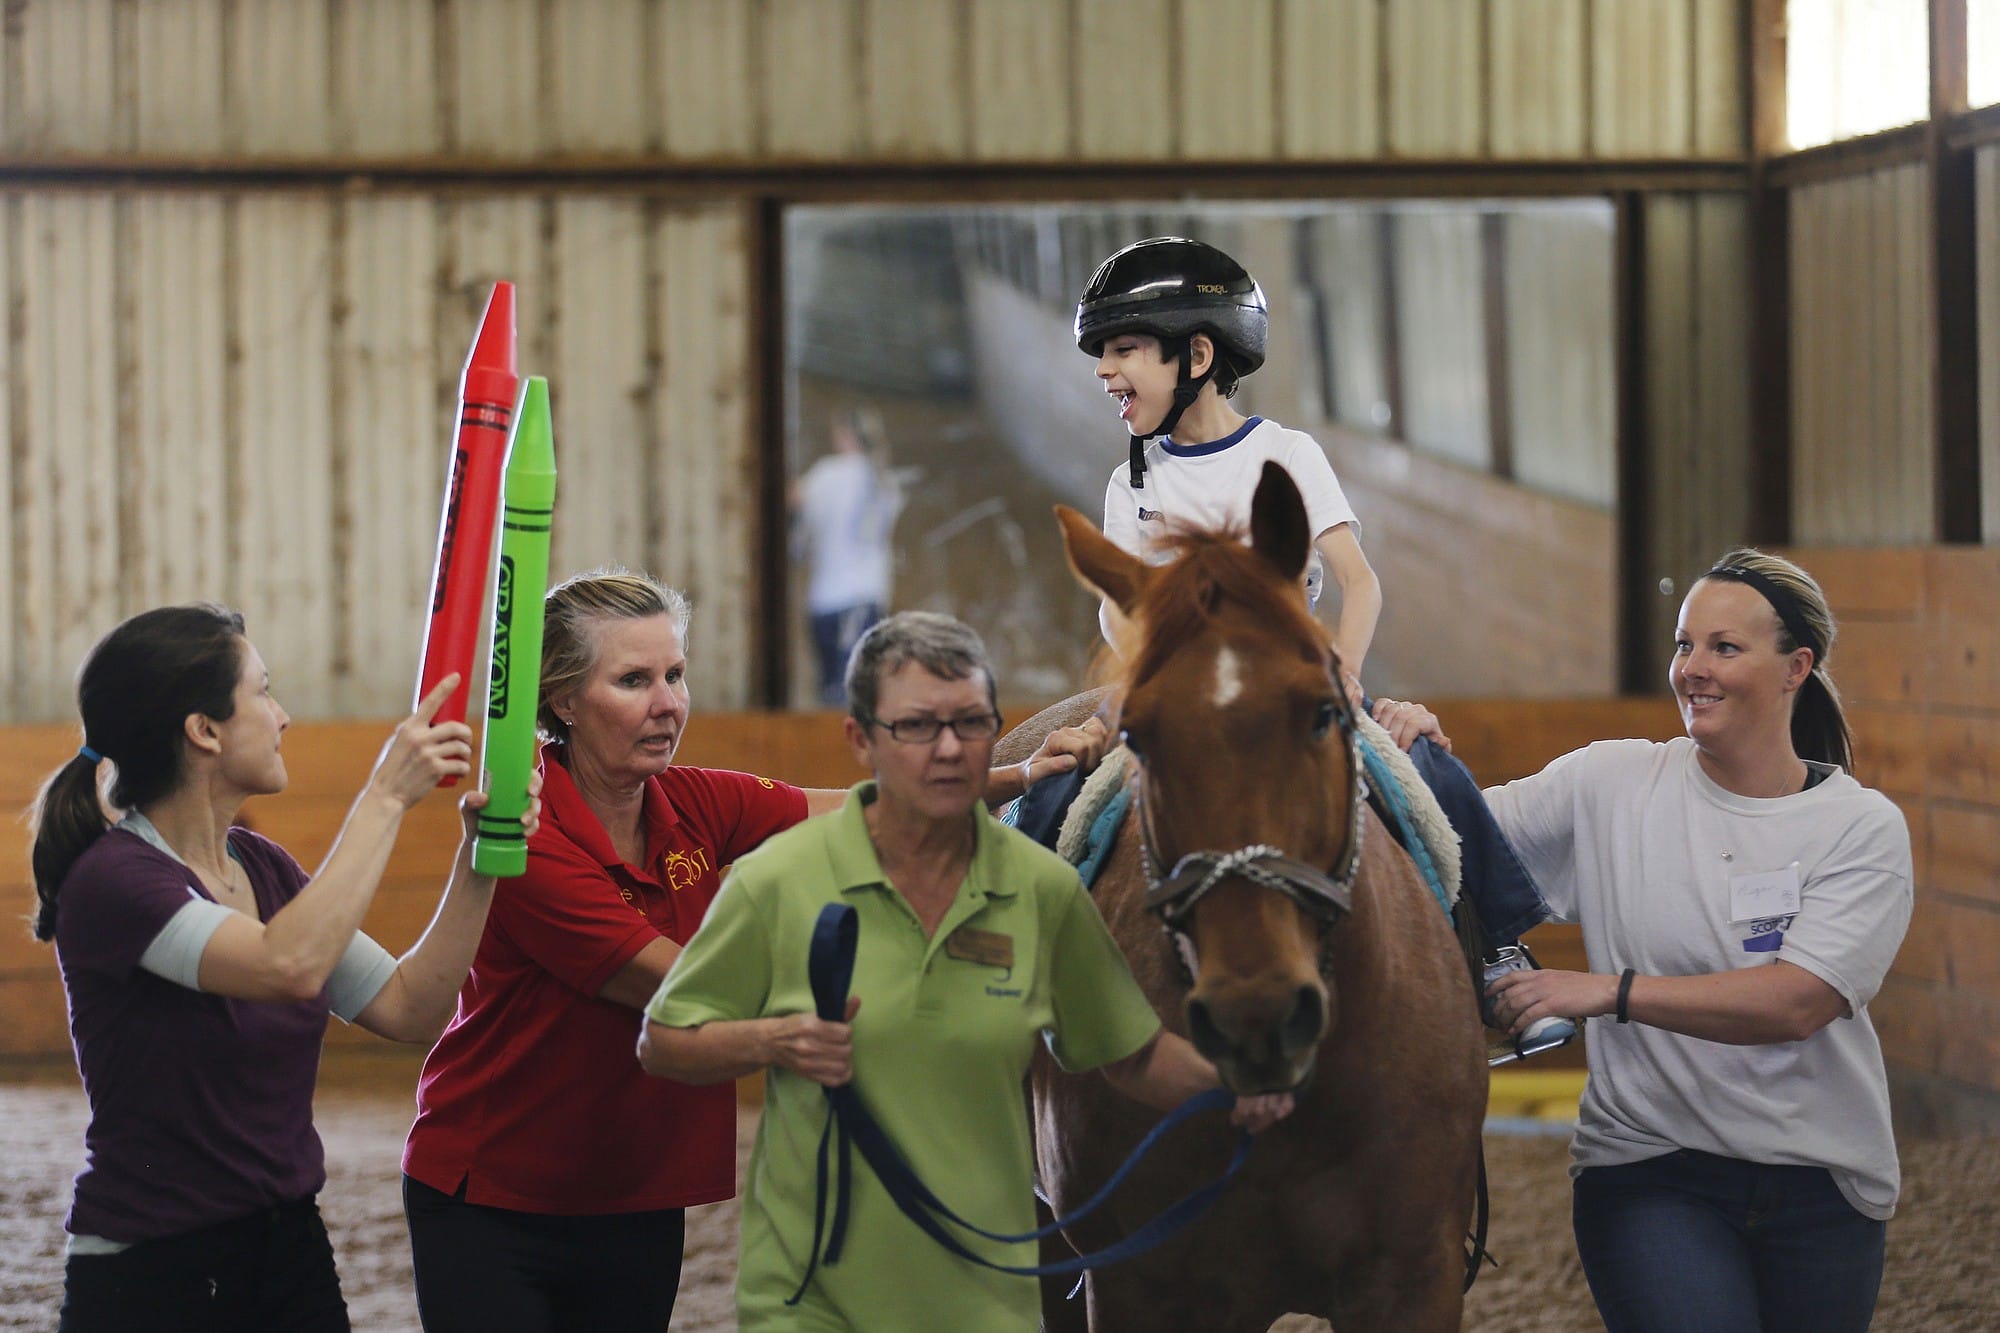 Jonathan Lopez, 7, who has cerebral palsy, watches therapist Kristi Immitt, far left, while volunteers guide Patron during the boy's hippotherapy session at Equest on March 31.